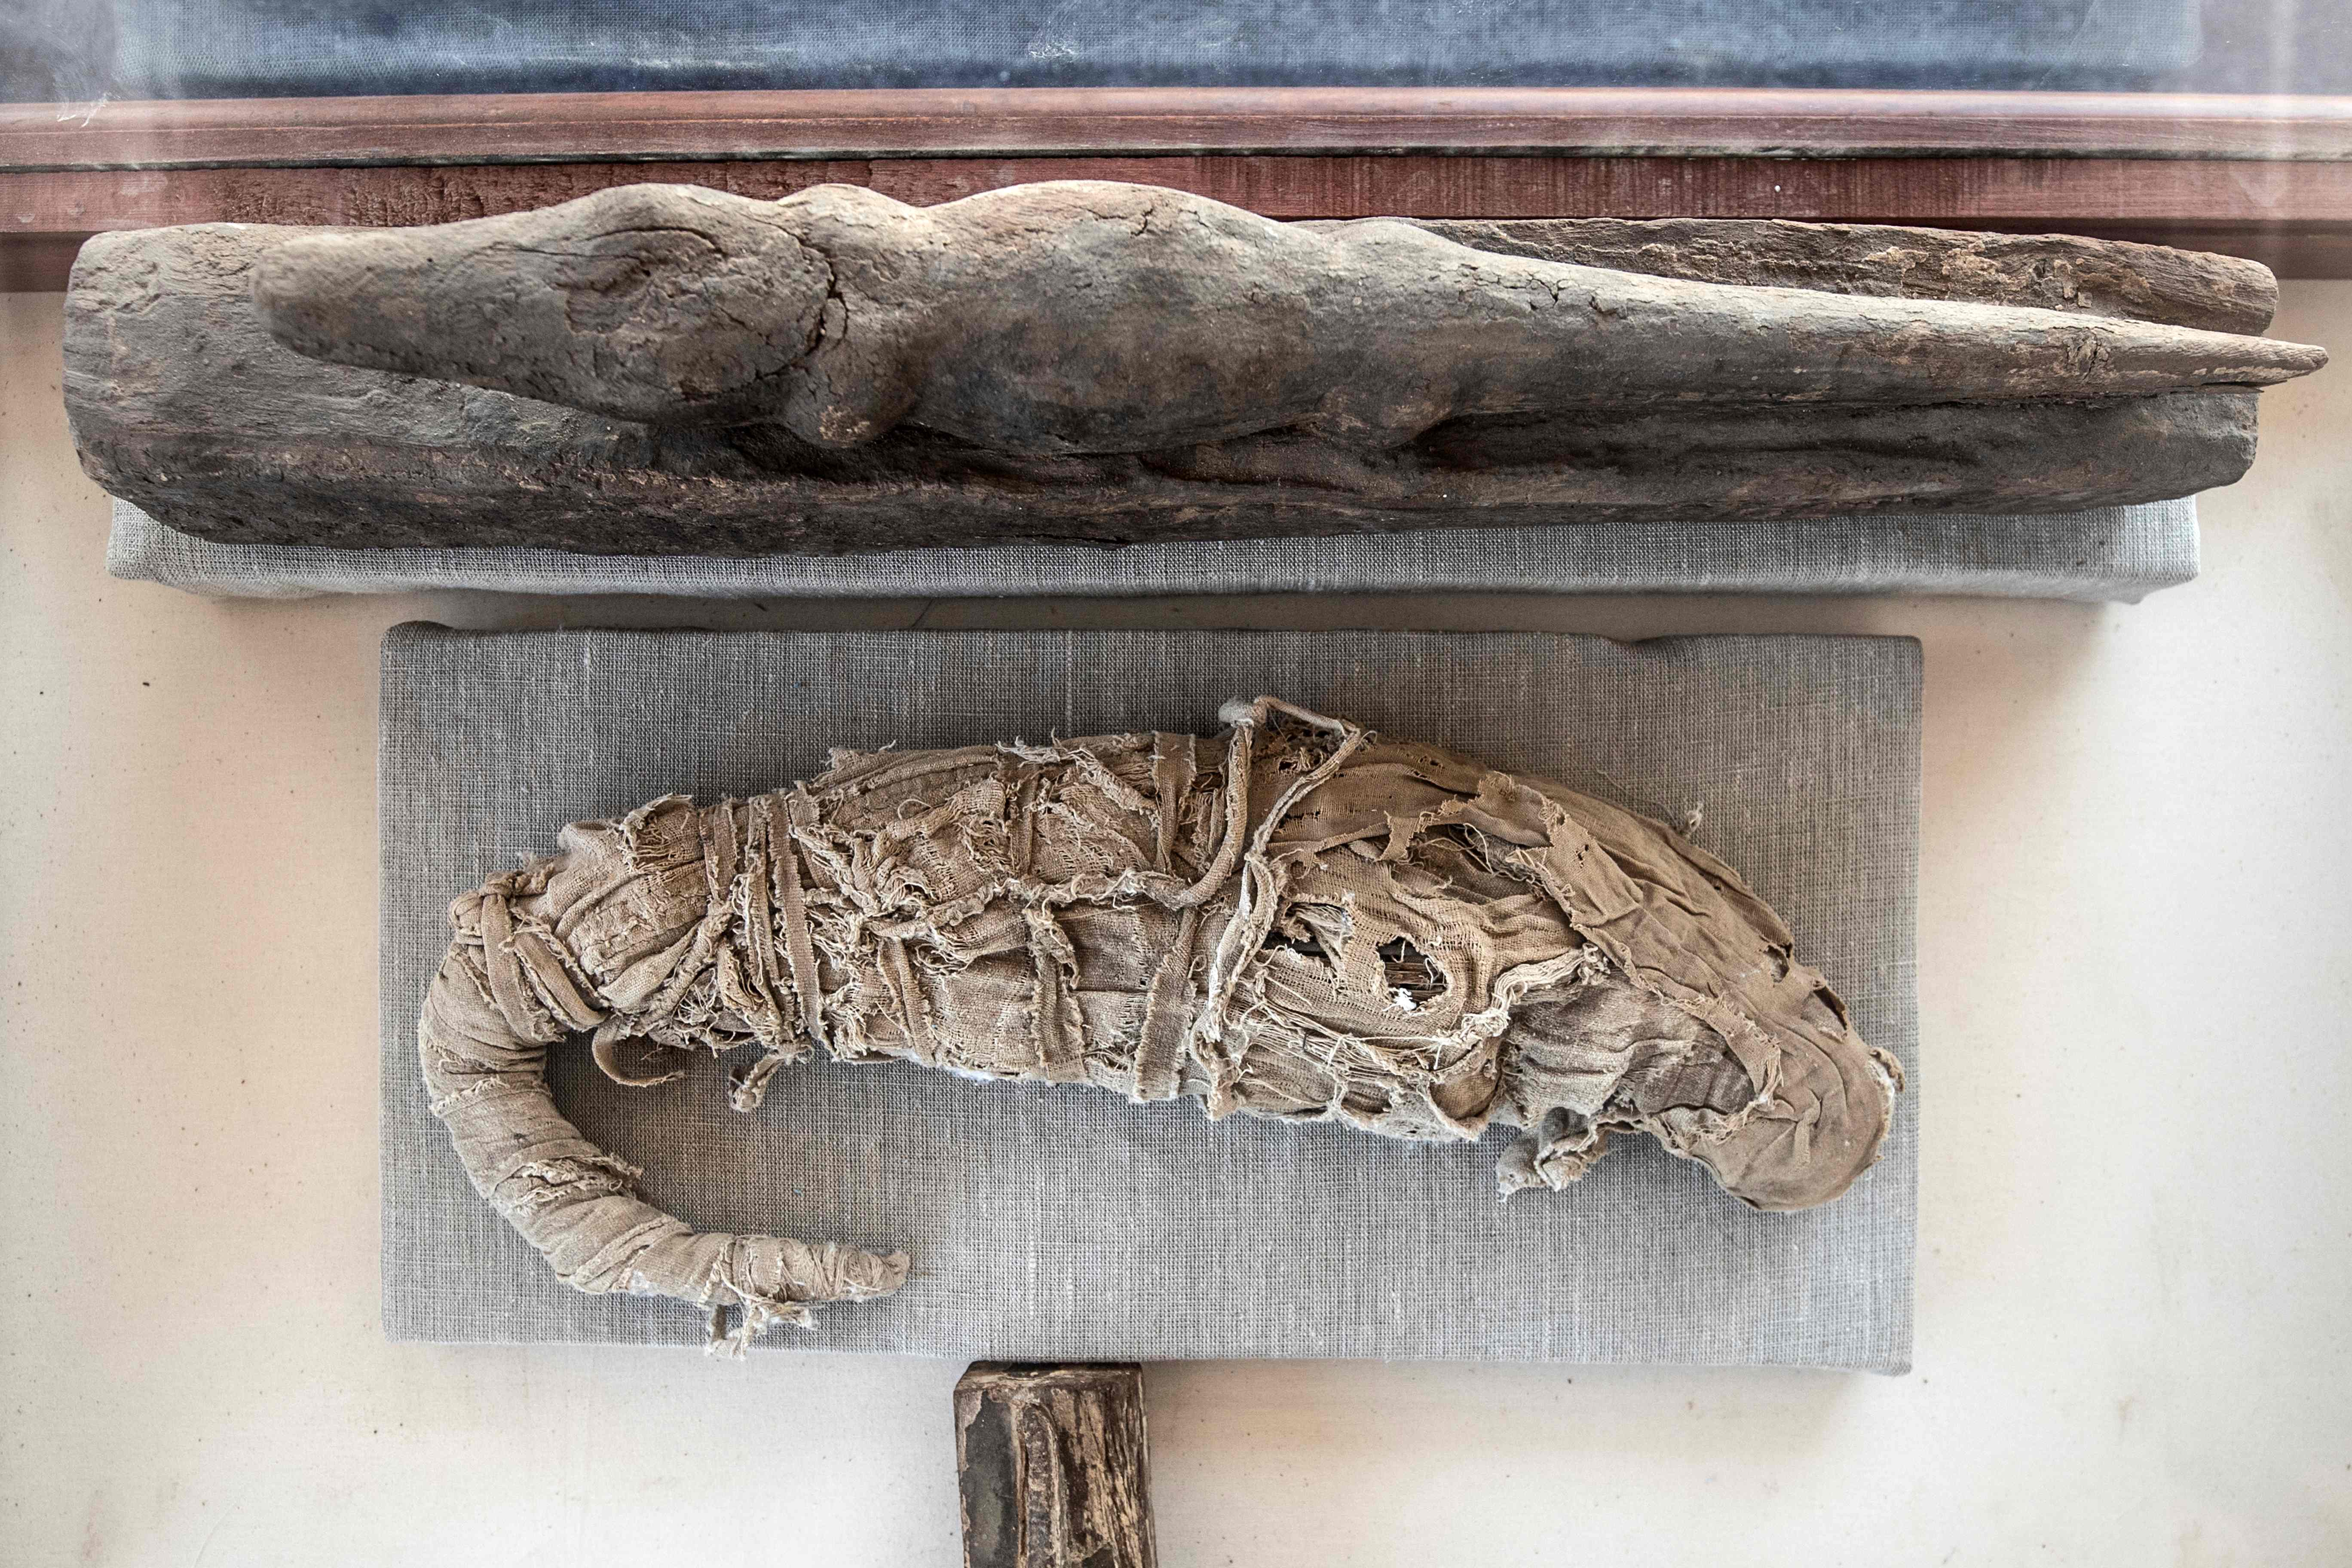 A crocodile mummy is displayed after the announcement of a new discovery carried out by an Egyptian archaeological team in Giza's Saqqara necropolis, south of the capital Cairo, on November 23, 2019. - Egypt today unveiled a cache of 75 wooden and bronze statues and five lion cub mummies decorated with hieroglyphics at the Saqqara necropolis near the Giza pyramids in Cairo. Mummified cats, cobras, crocodiles and scarabs were also unearthed among the well-preserved mummies and other objects discovered recently. (Photo by Khaled DESOUKI / AFP)